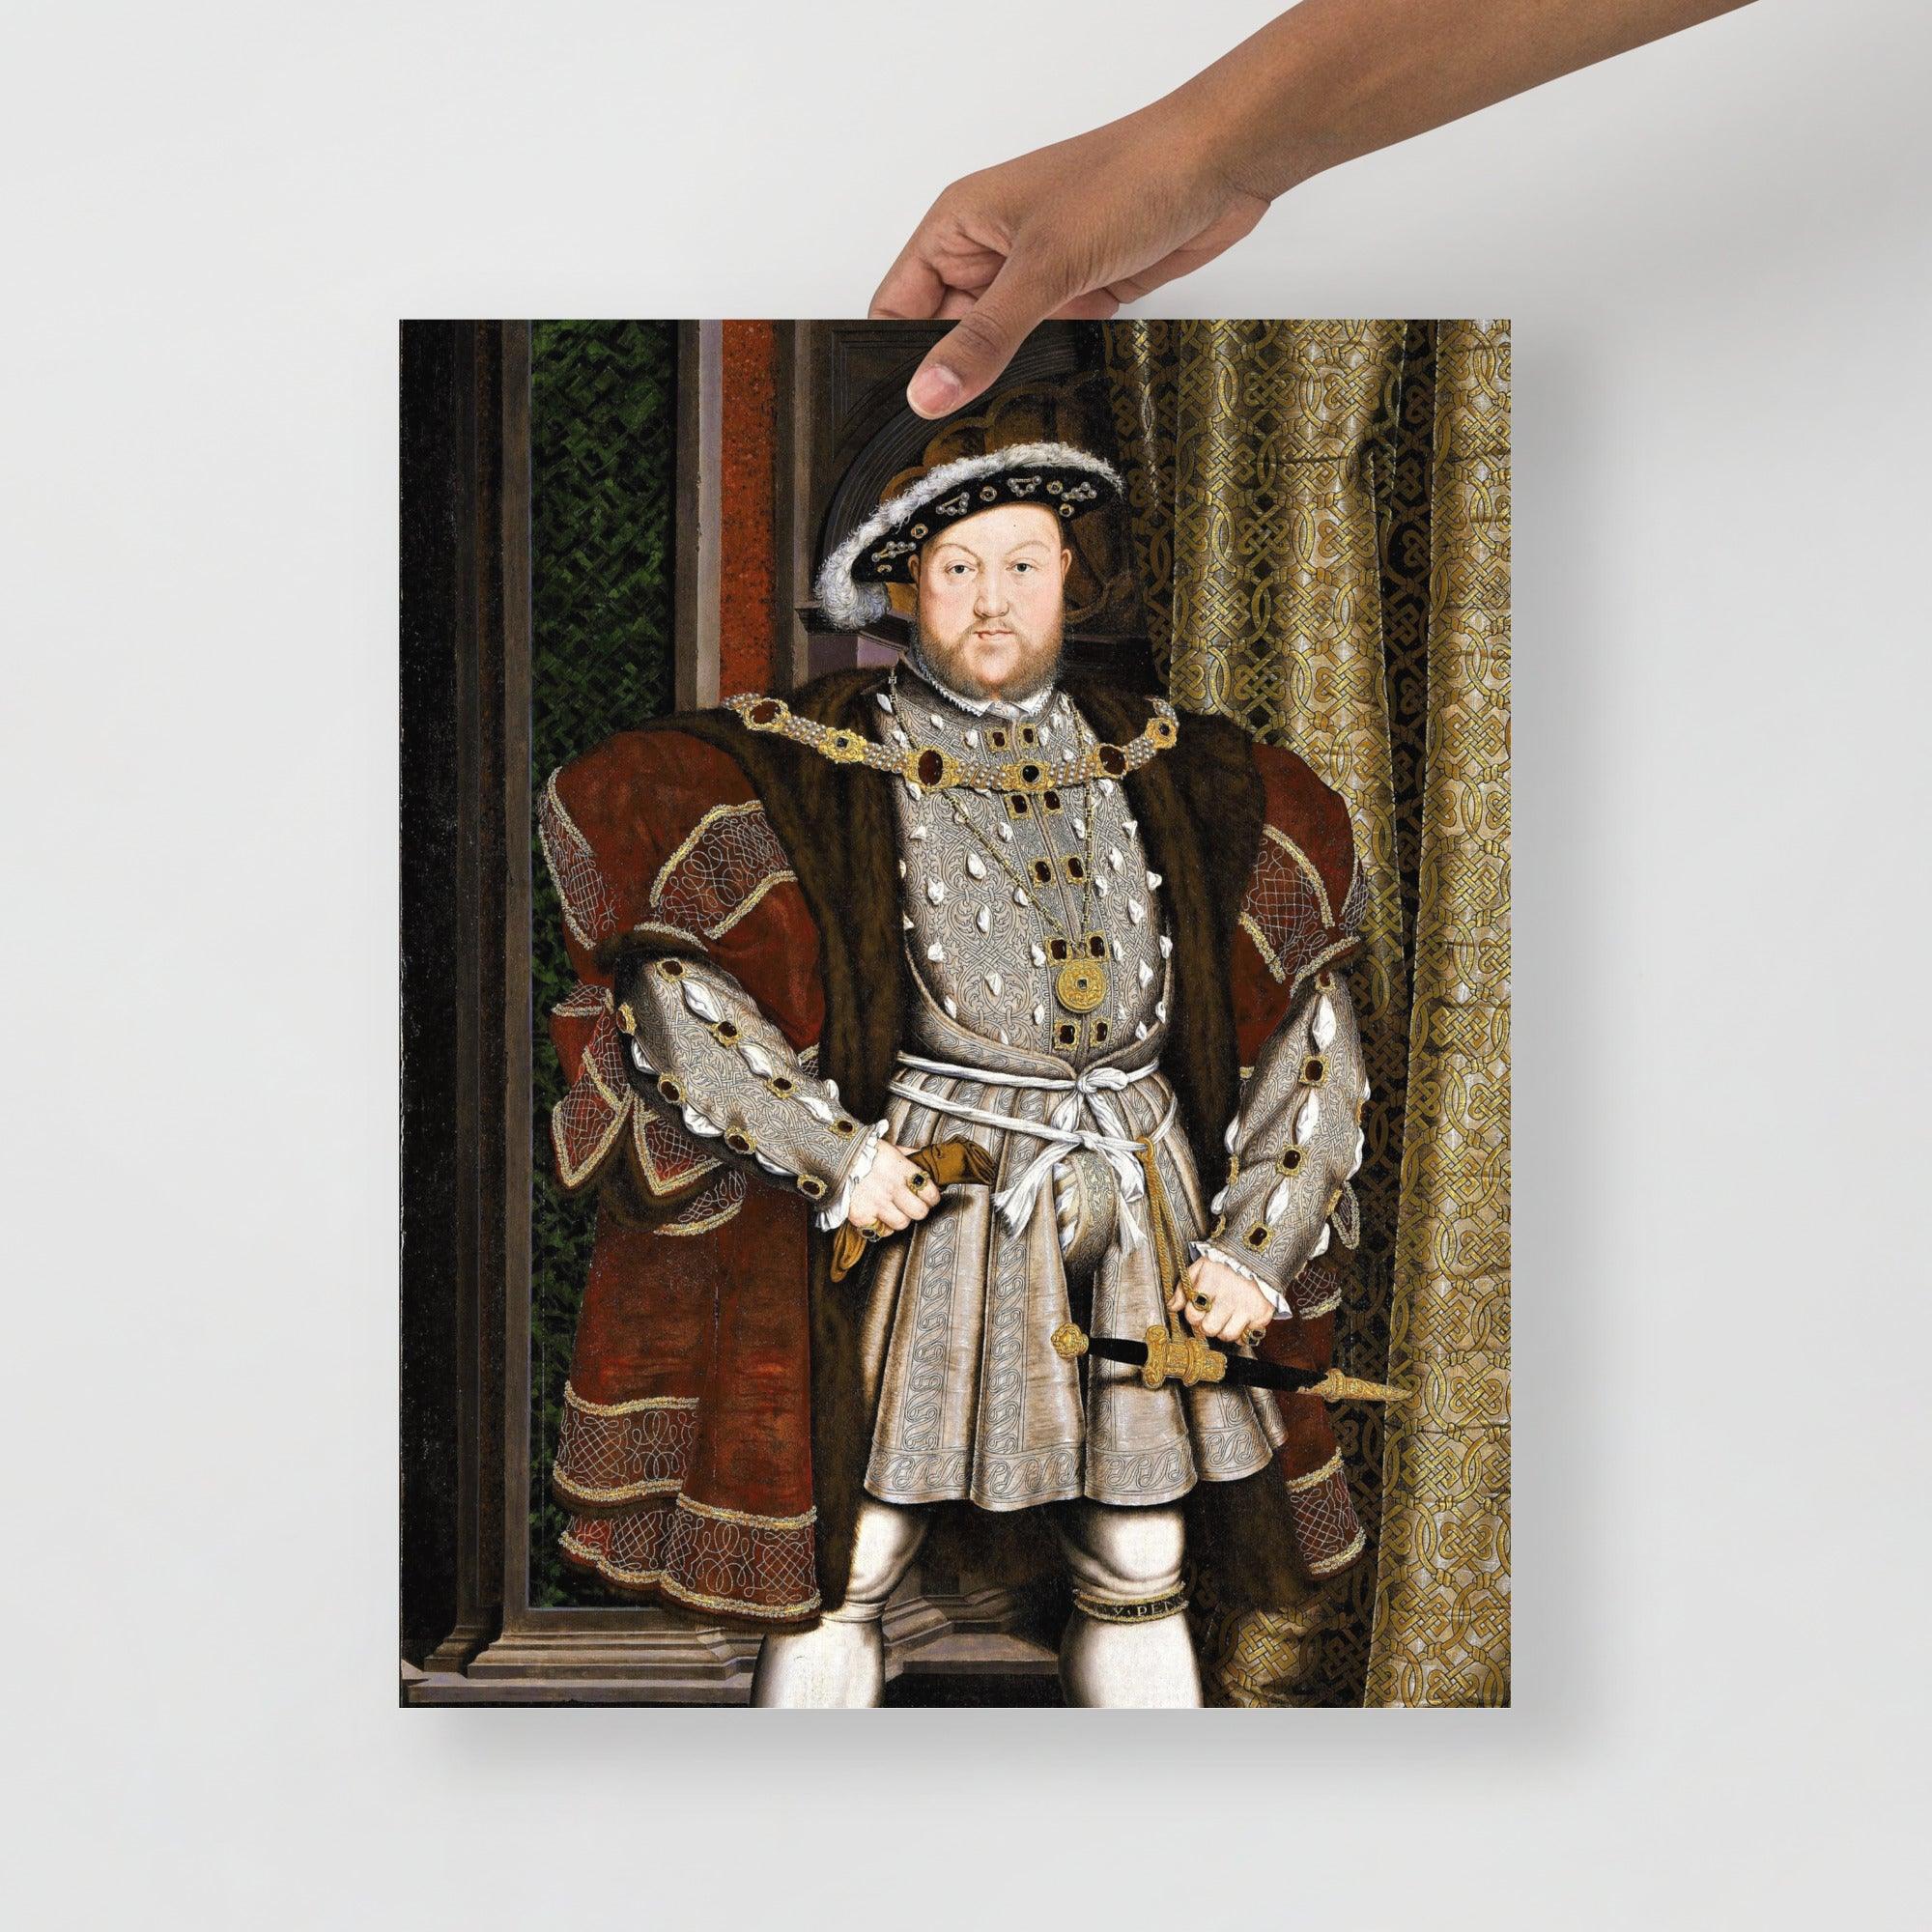 A Henry VIII Of England poster on a plain backdrop in size 16x20”.